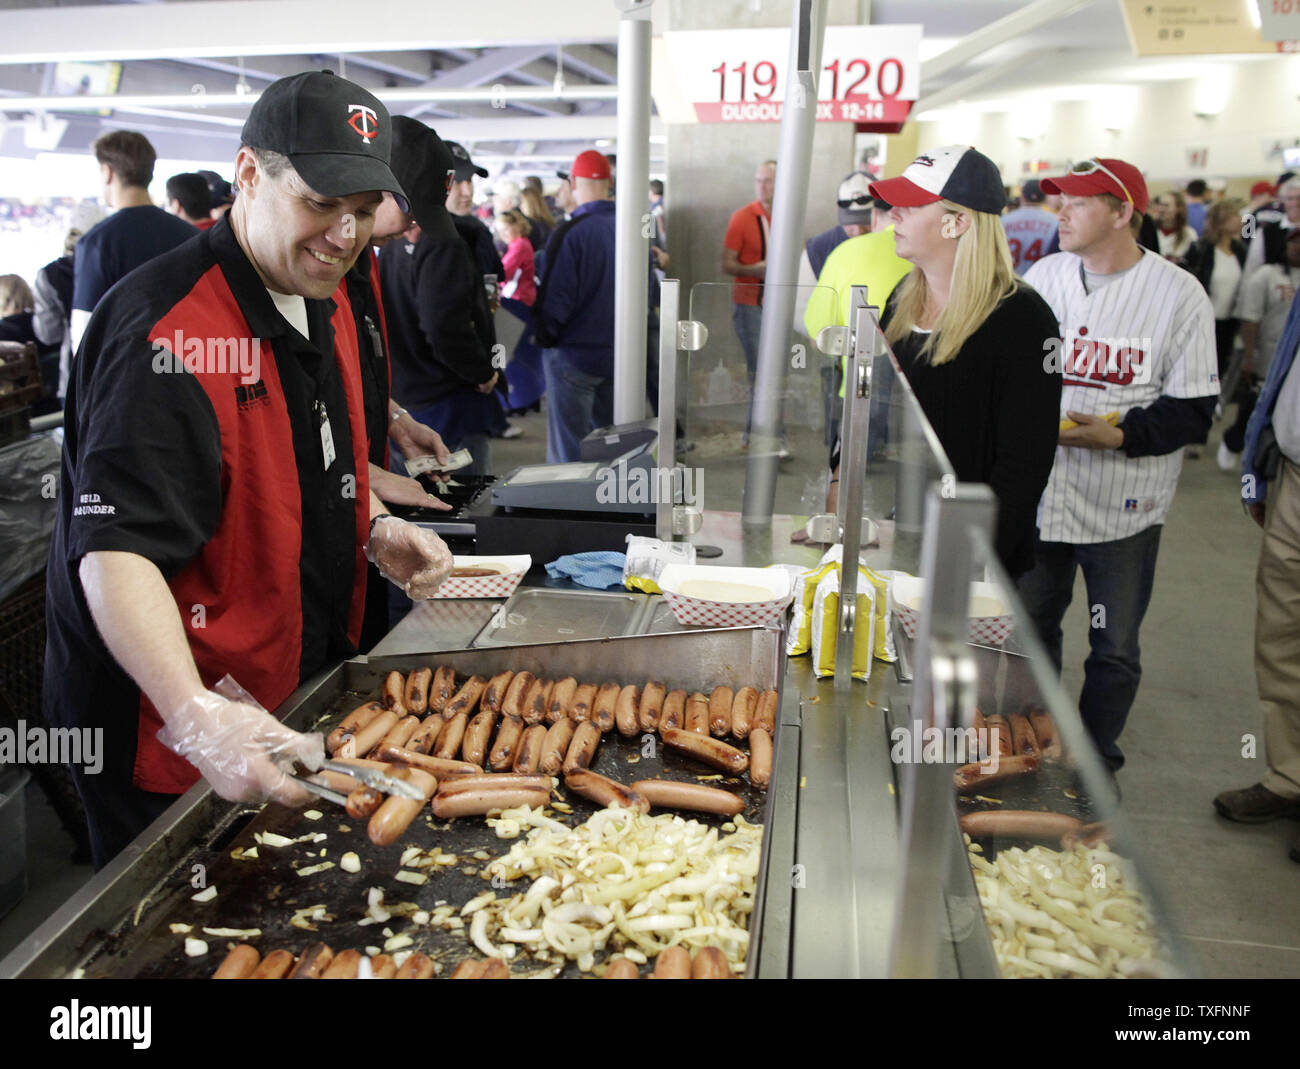 Vince O'Brein cooks up hot dogs on Opening Day at Target Field in Minneapolis on April 12, 2010. The new open-air ballpark made its official debut Monday as the Minnesota Twins beat the Boston Red Sox 5-2 in the game.    UPI/Brian Kersey Stock Photo